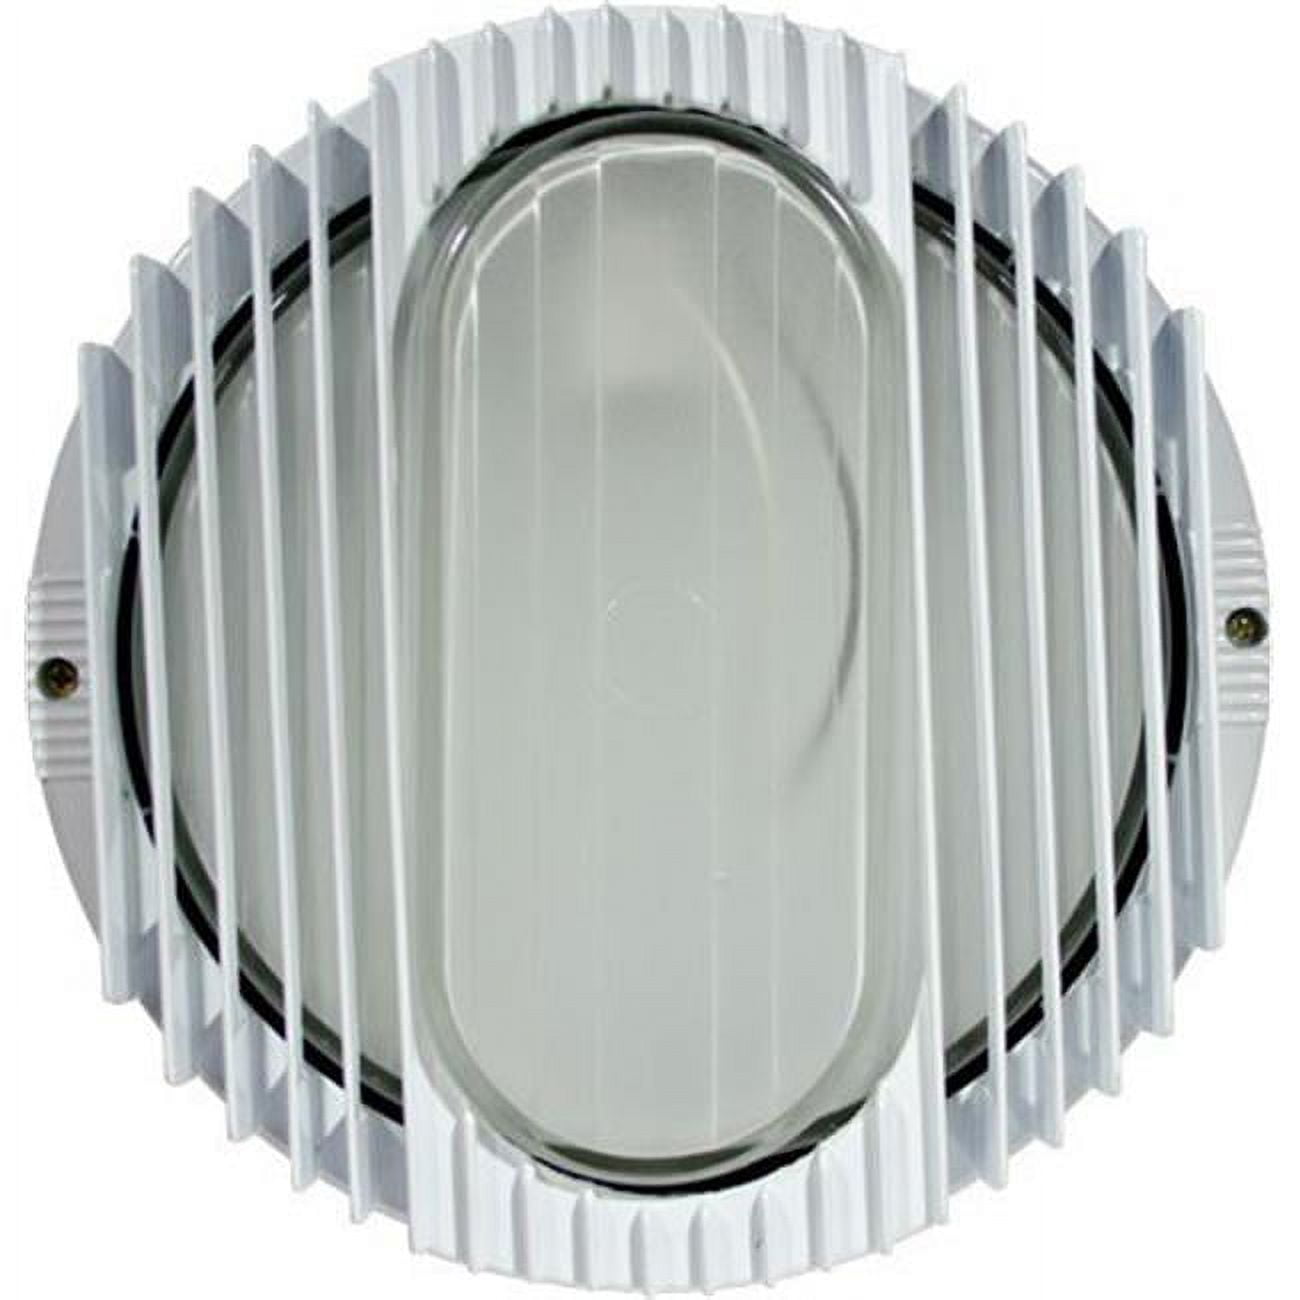 Picture of Dabmar Lighting W3050-LED12-W Cast Aluminum Wall Fixture LED - 12W 120V, White